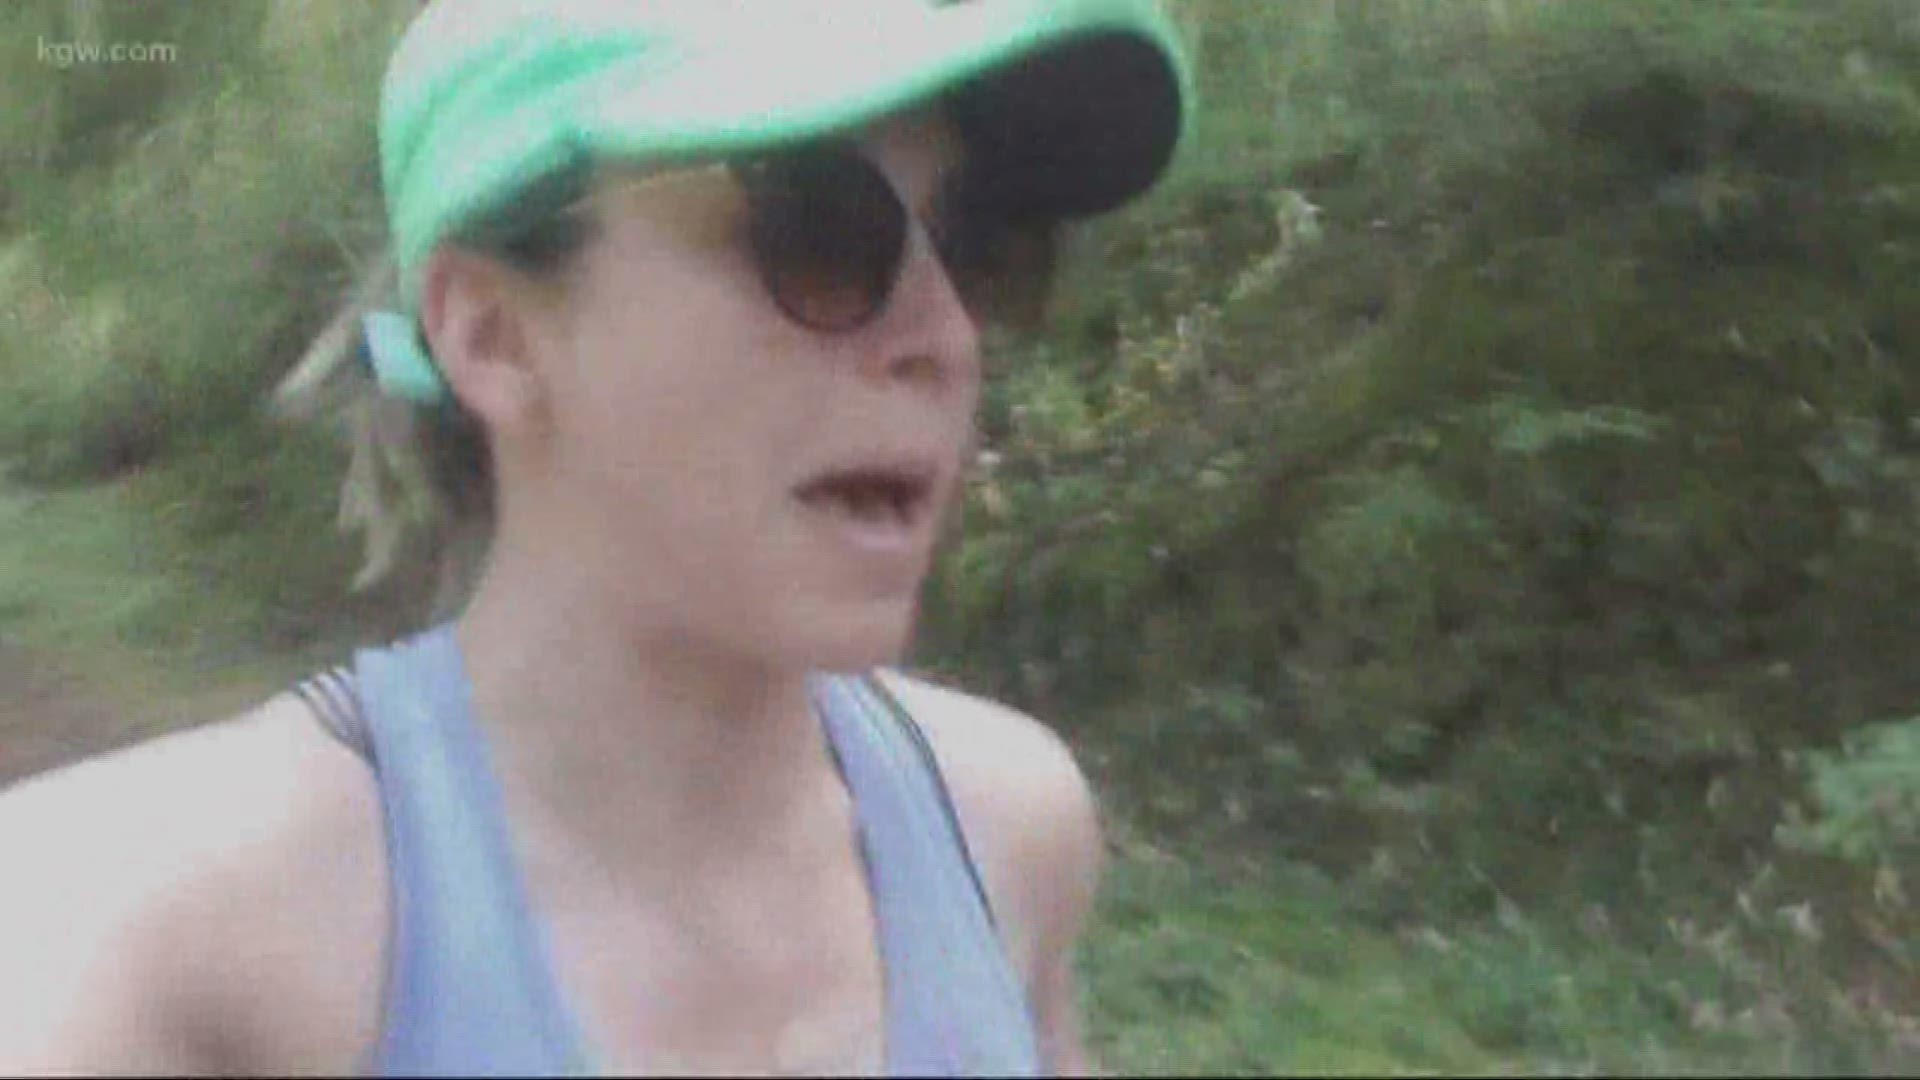 KGW has a team running in Hood to Coast. We check in with Cassidy during the run!
#TonightwithCassidy